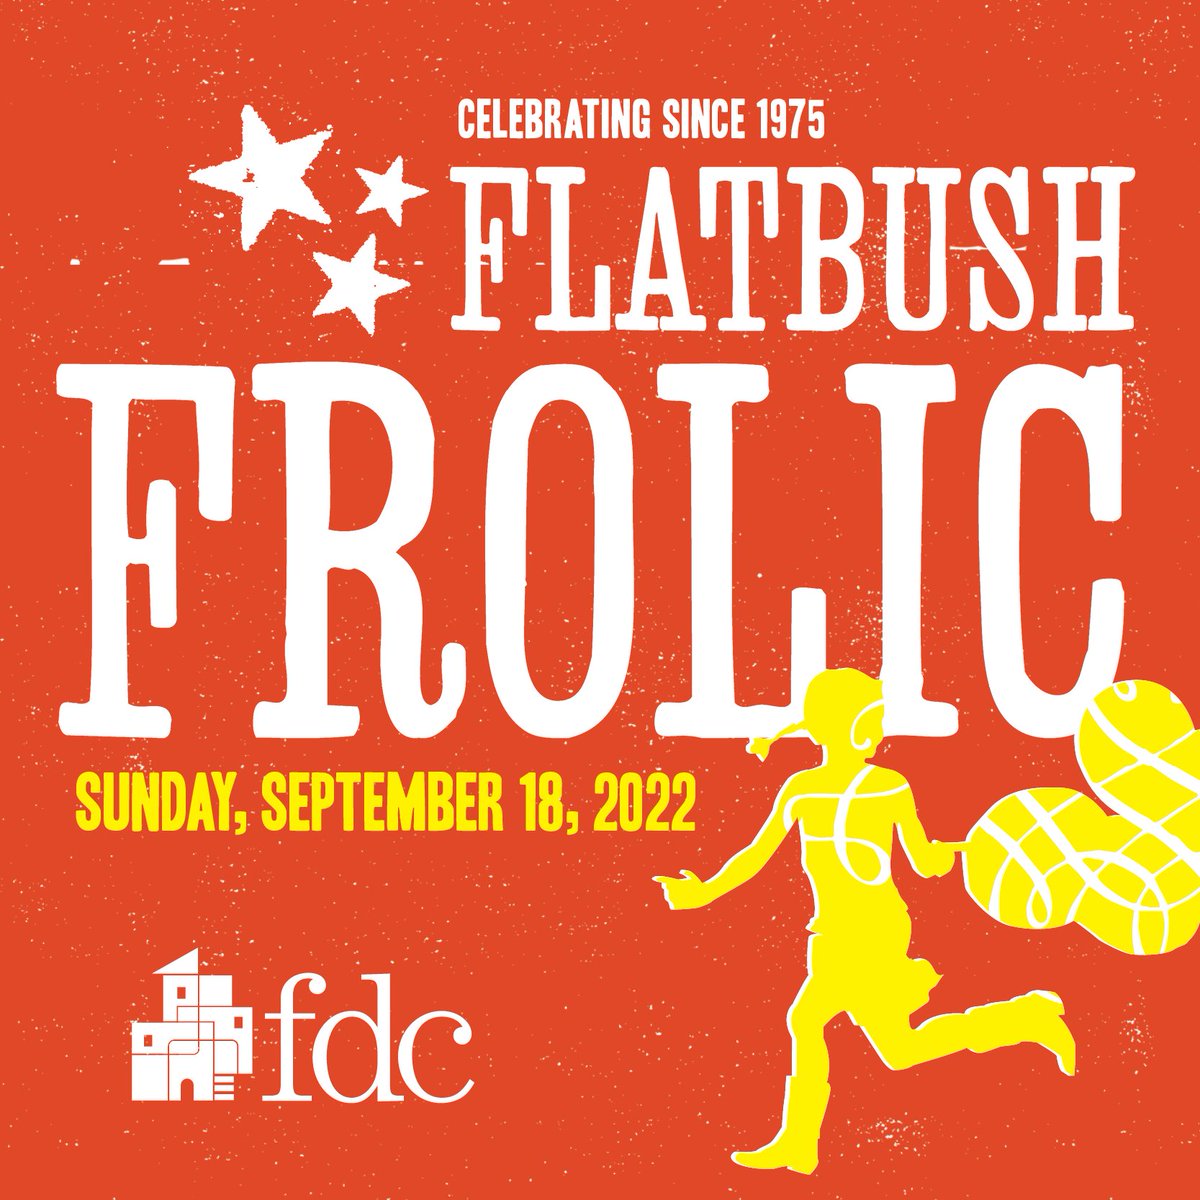 We hope to see you at the Frolic